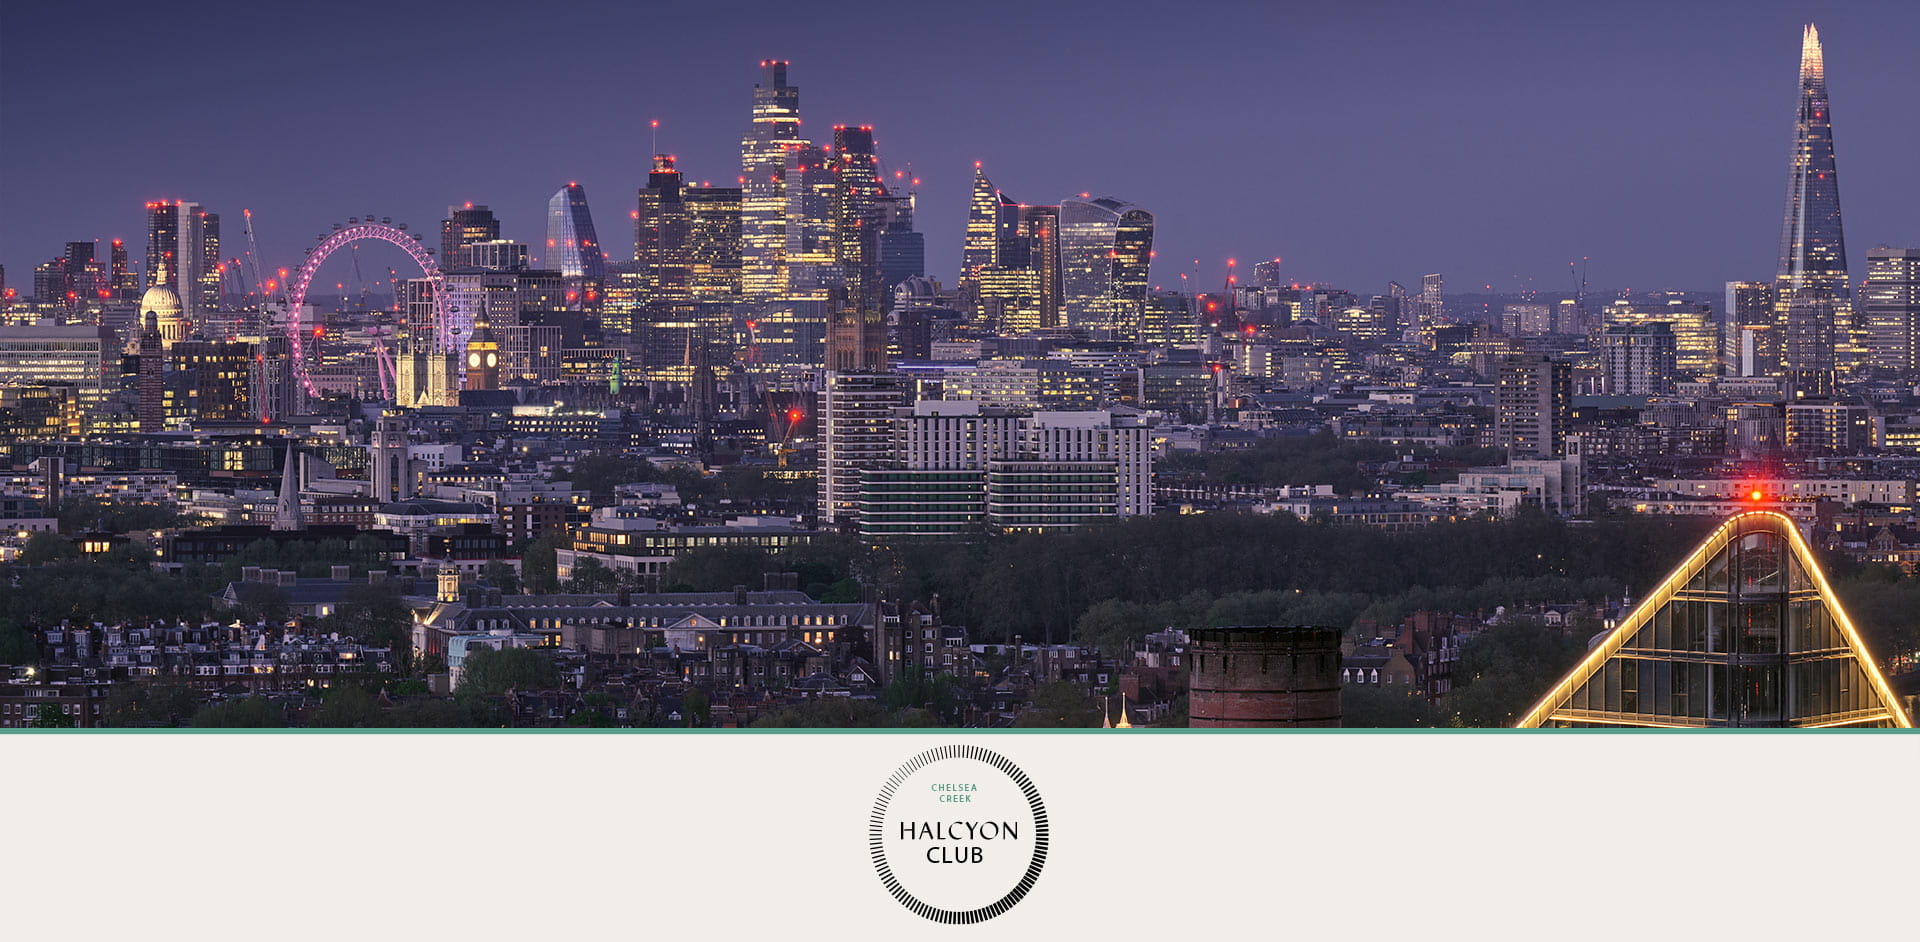 Image of the London skyline at night